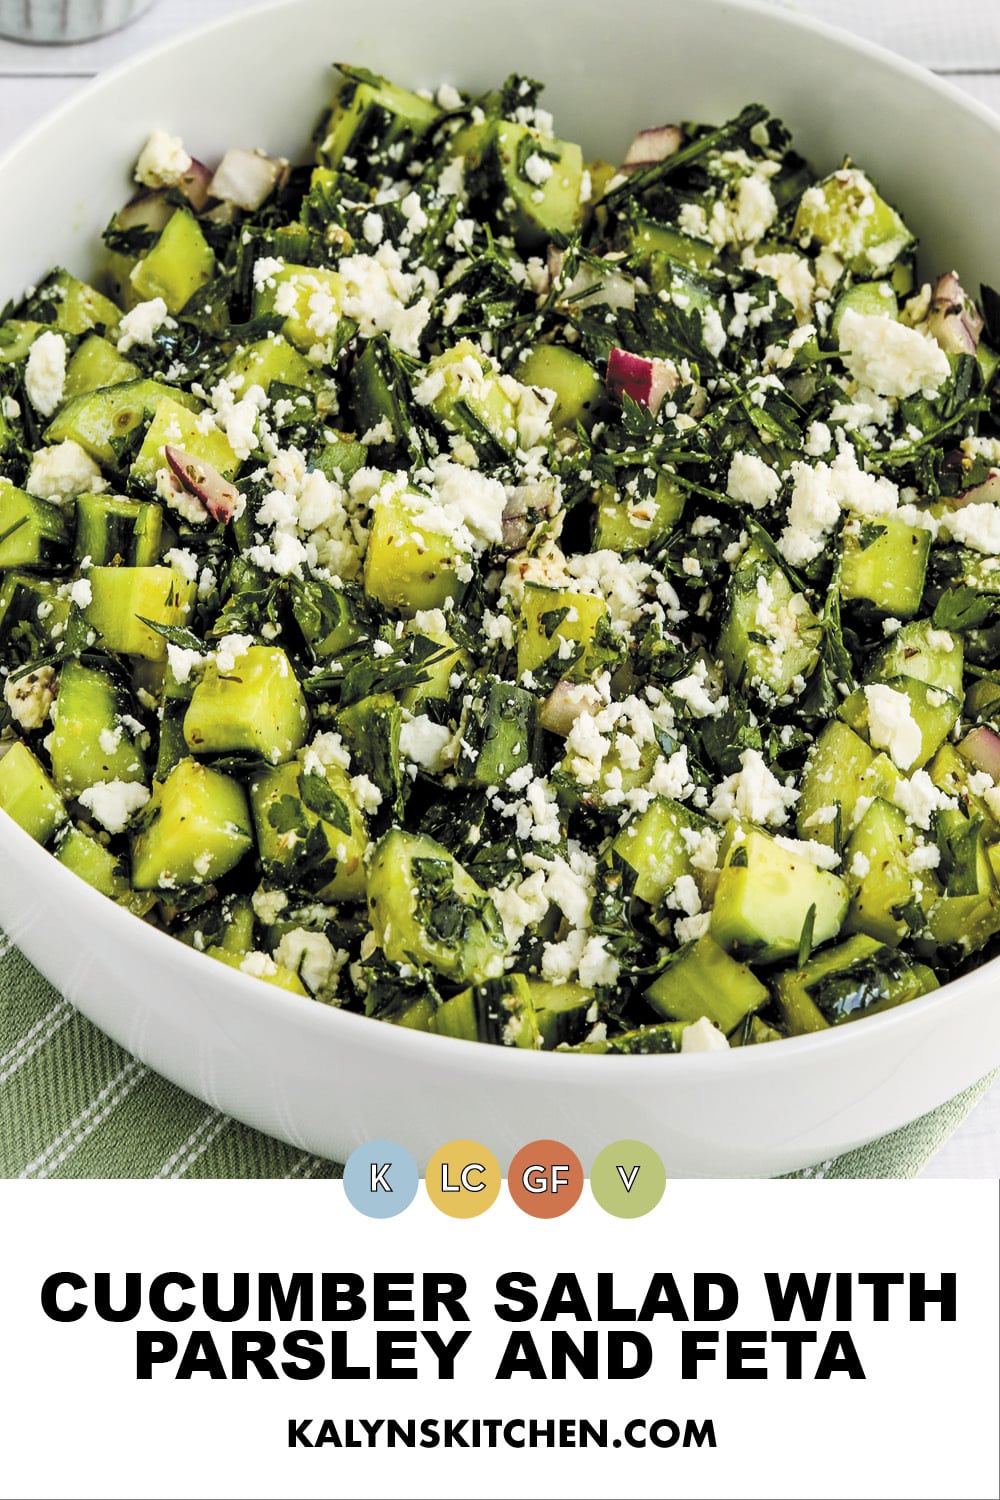 Pinterest image of Cucumber Salad with Parsley and Feta